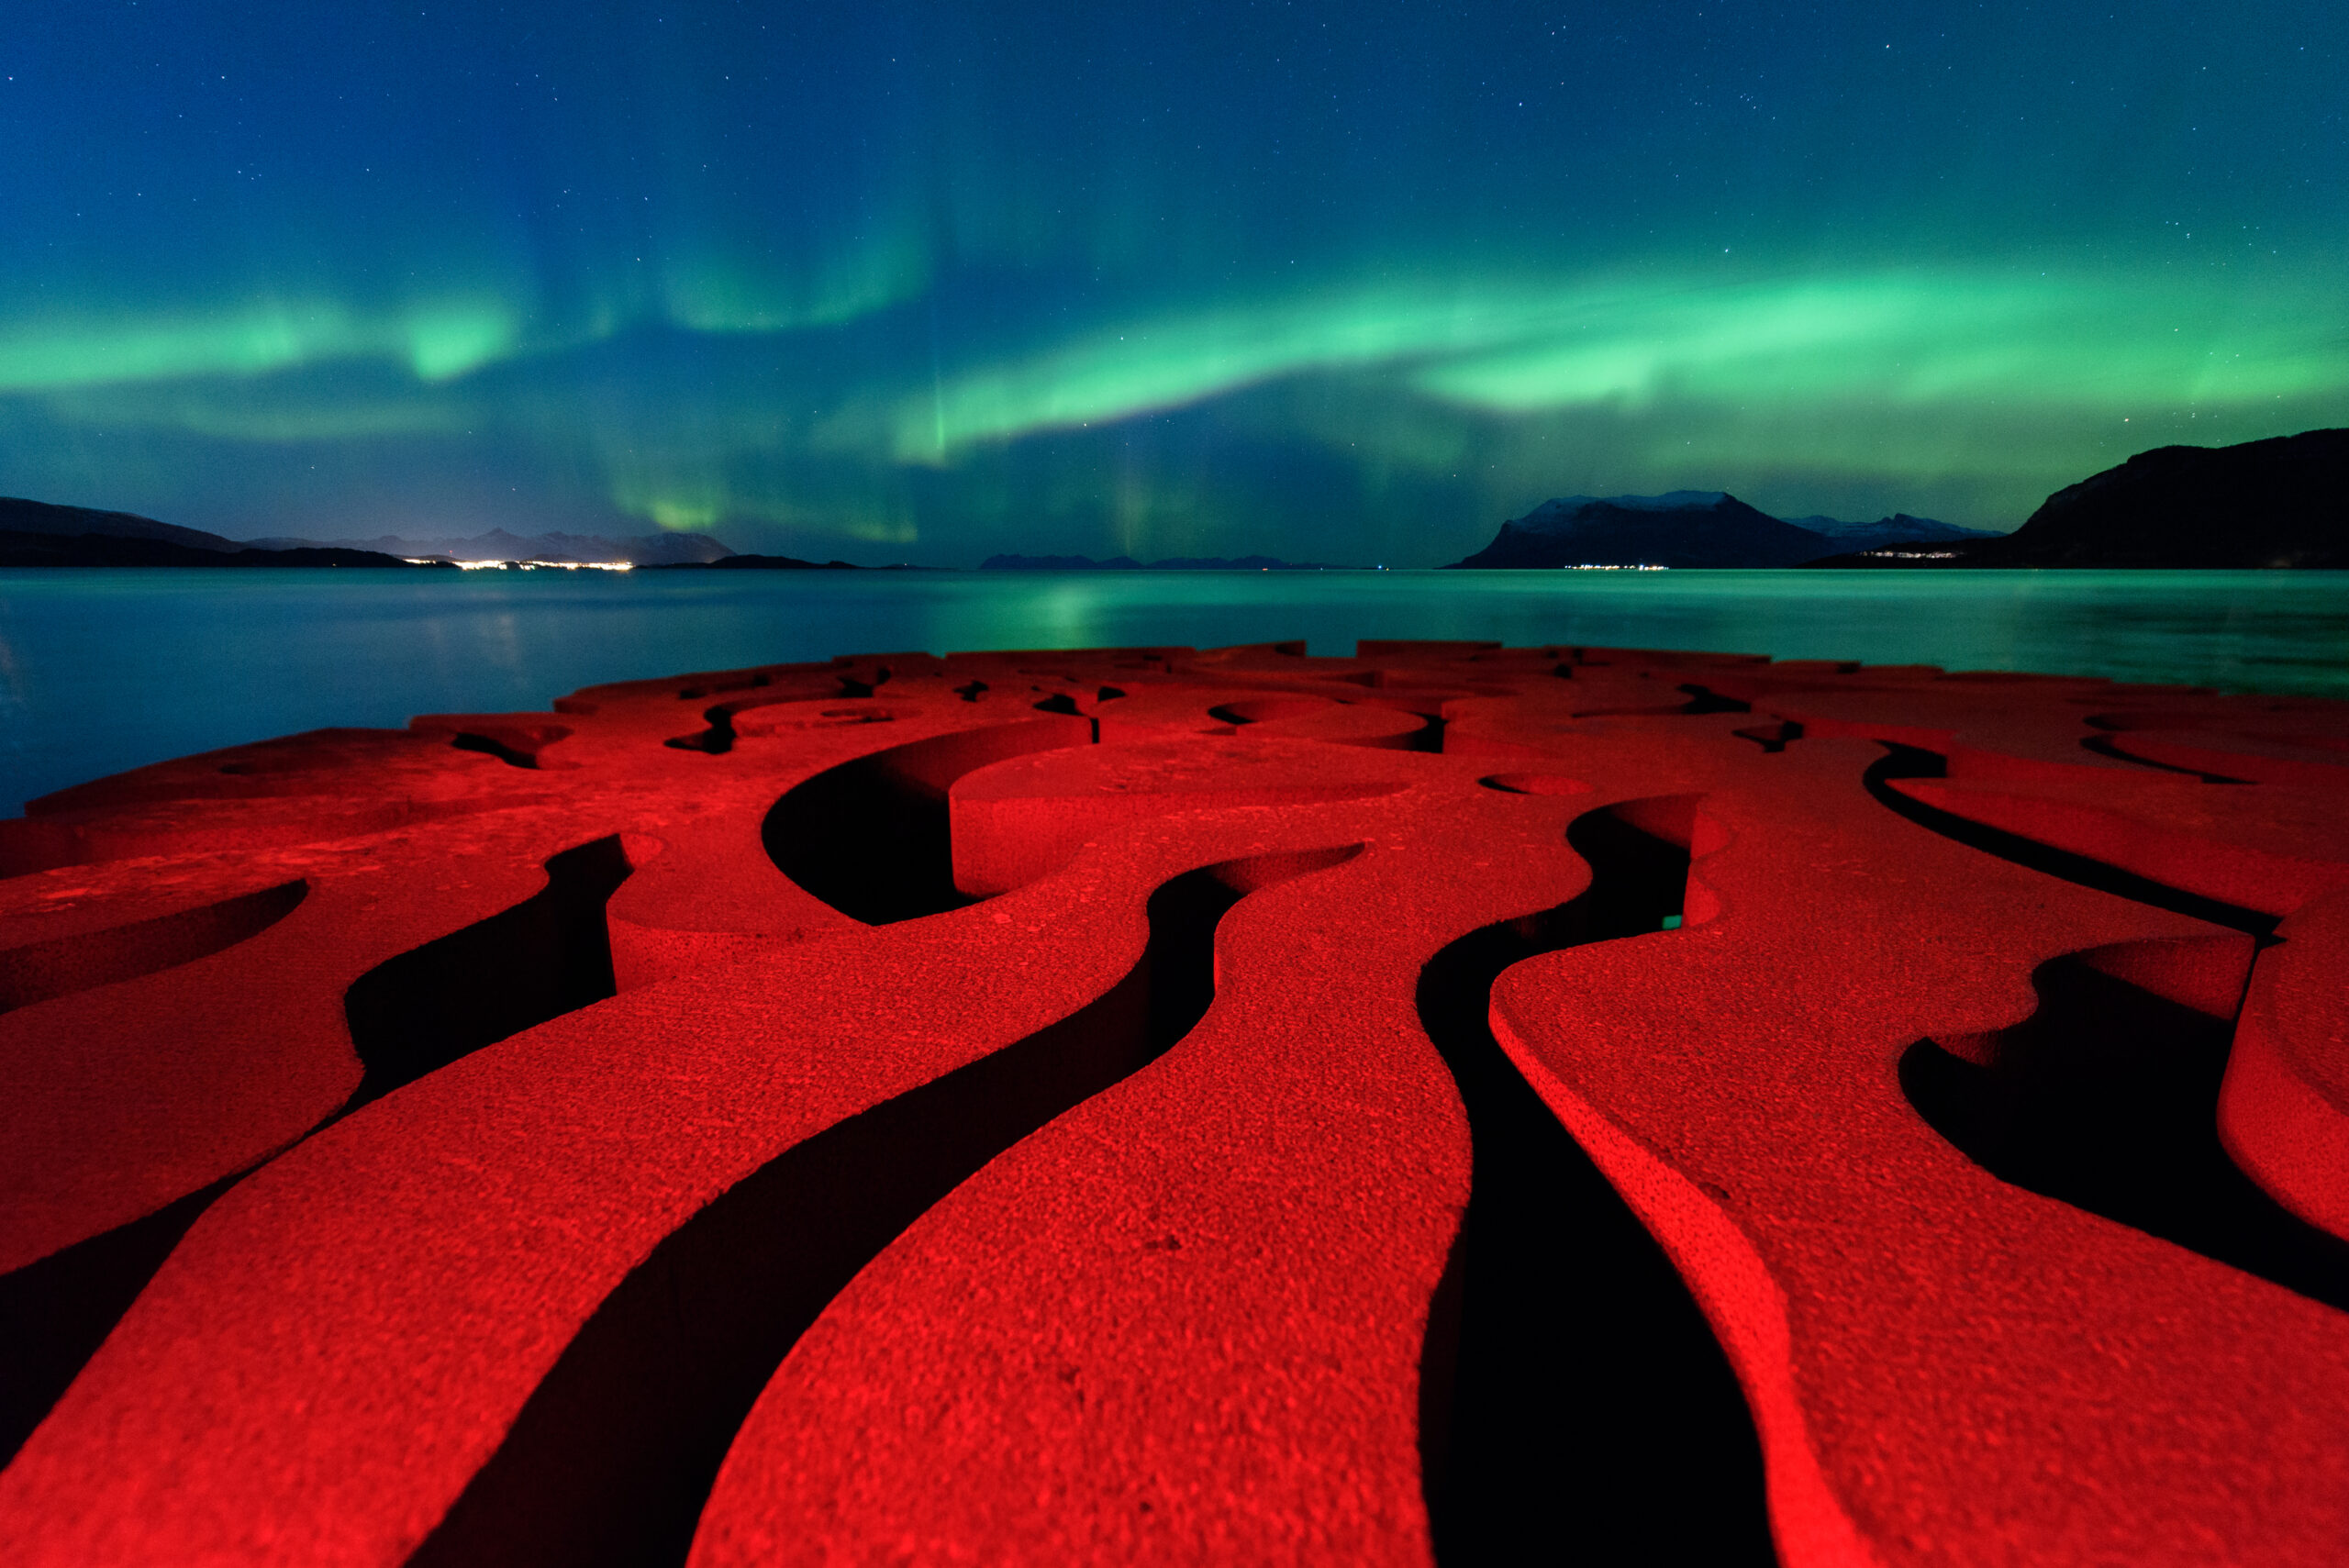 10 Of The Finalist Entries For Astronomy Photographer Of The Year